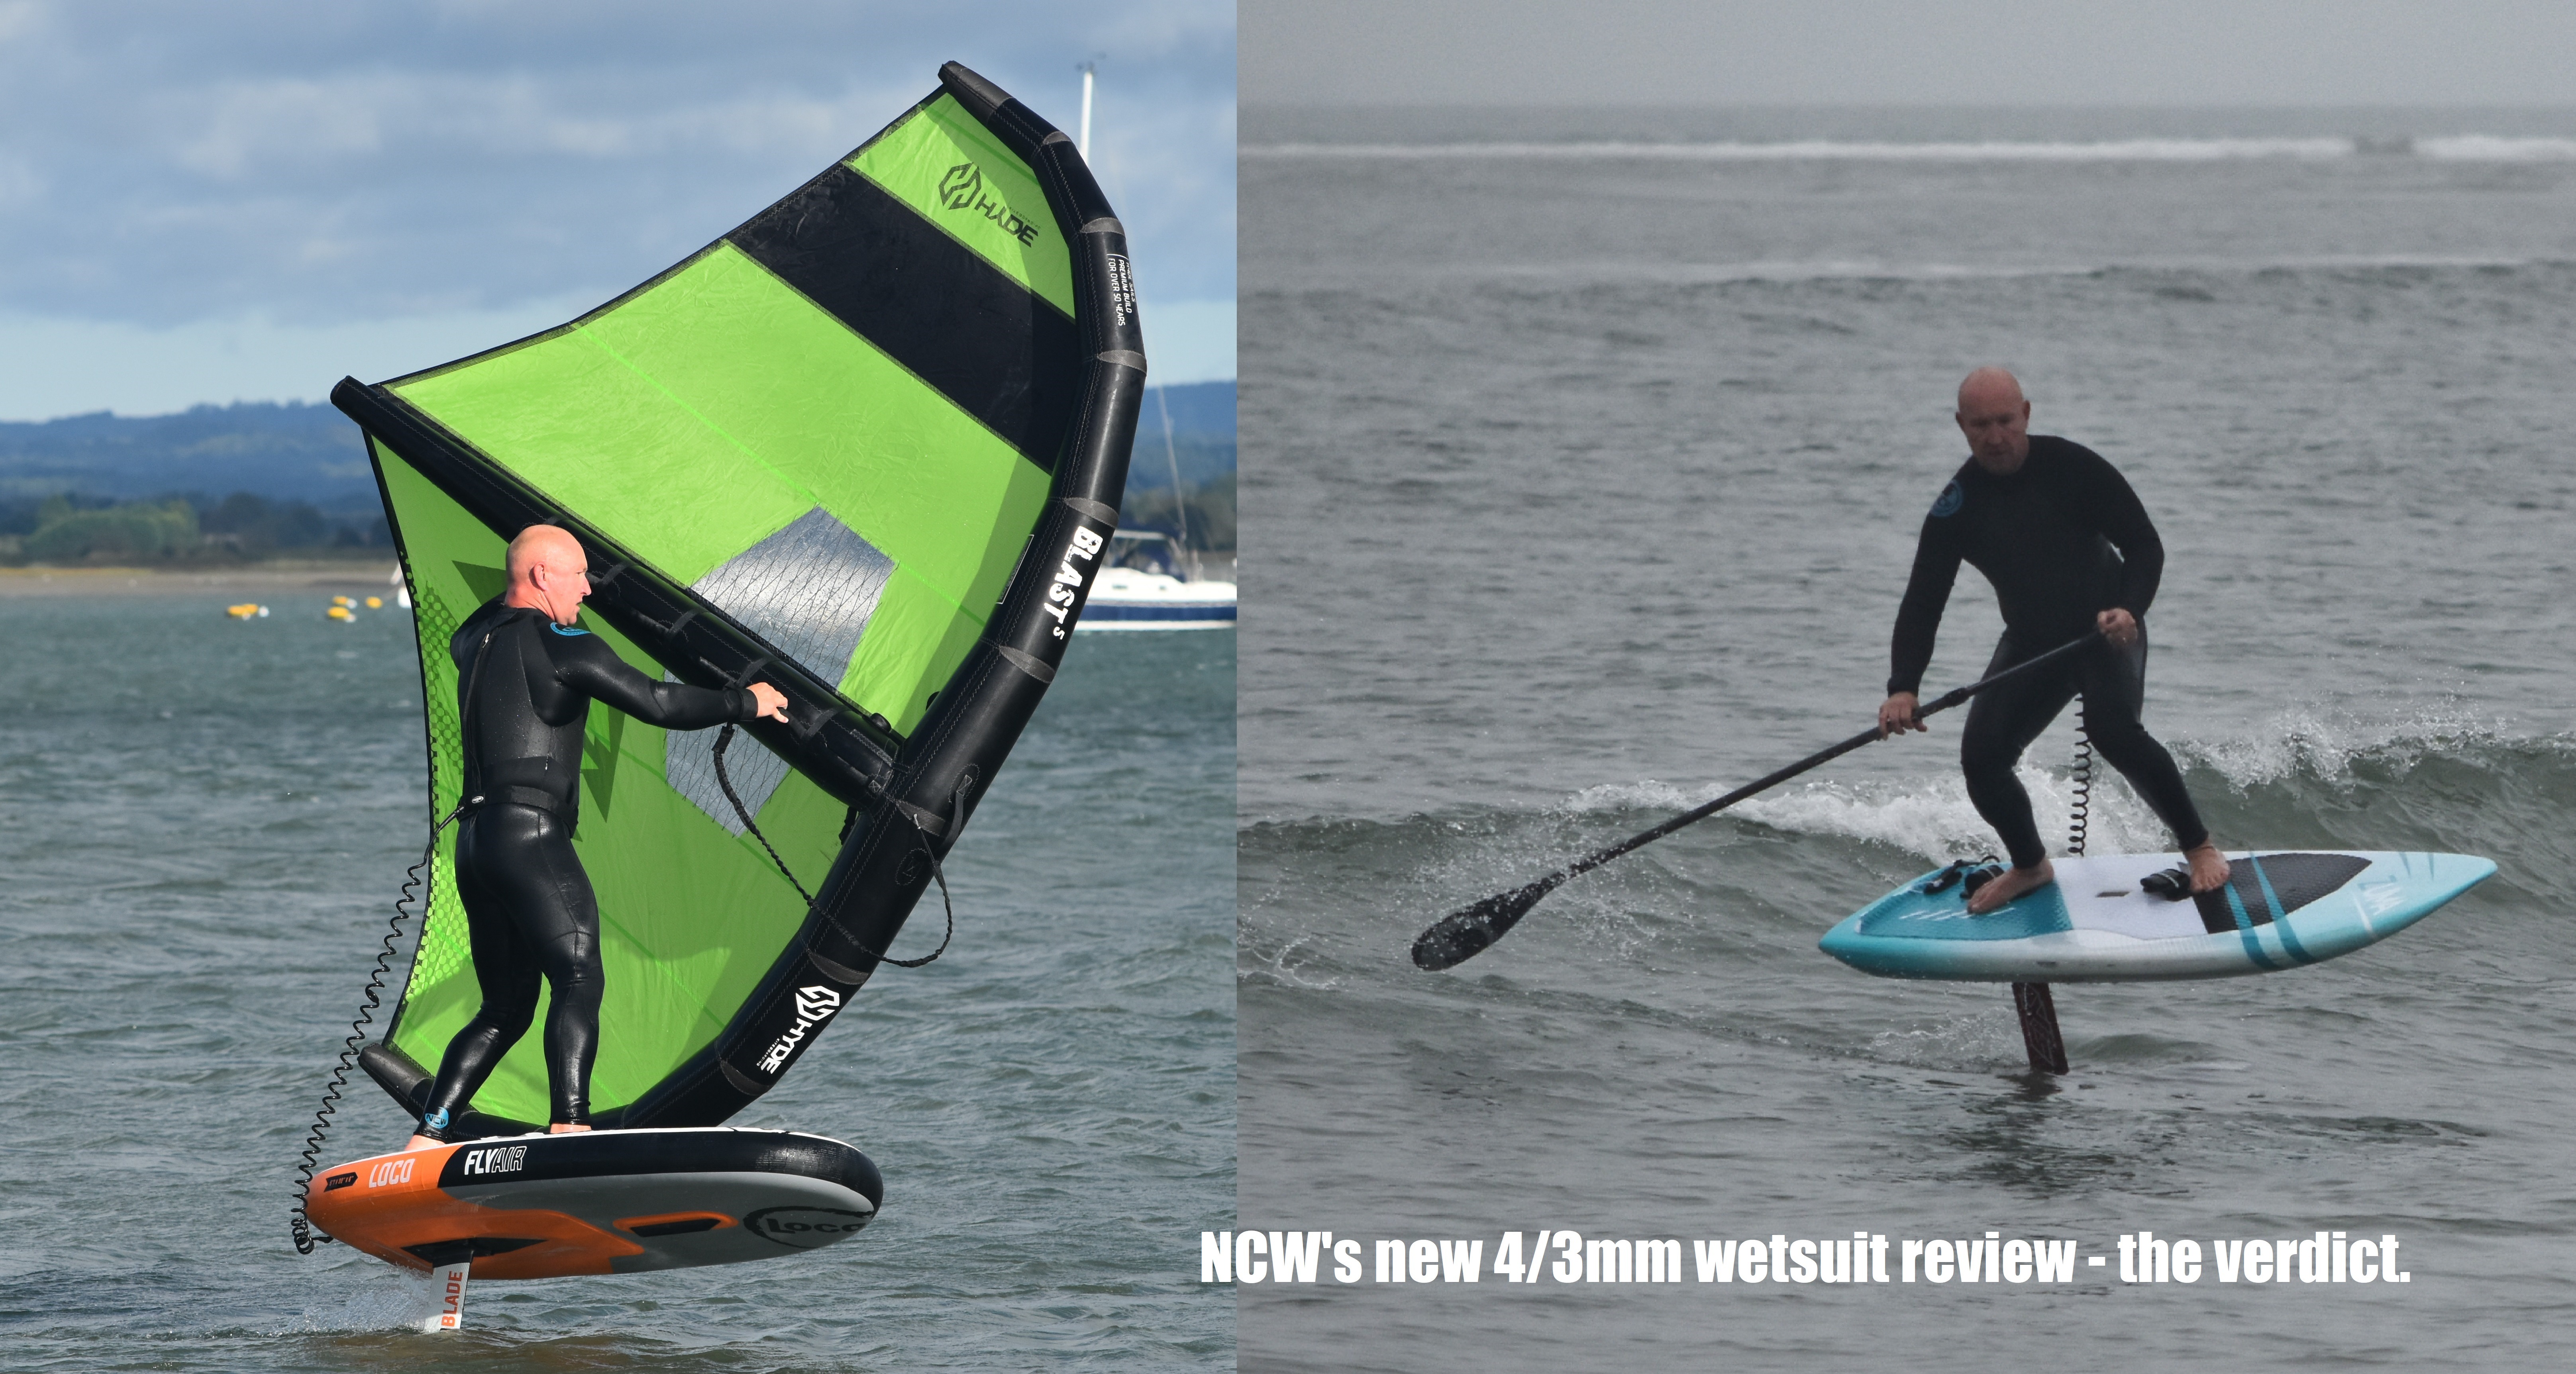 NCW's new 4/3mm wetsuit review - the verdict.